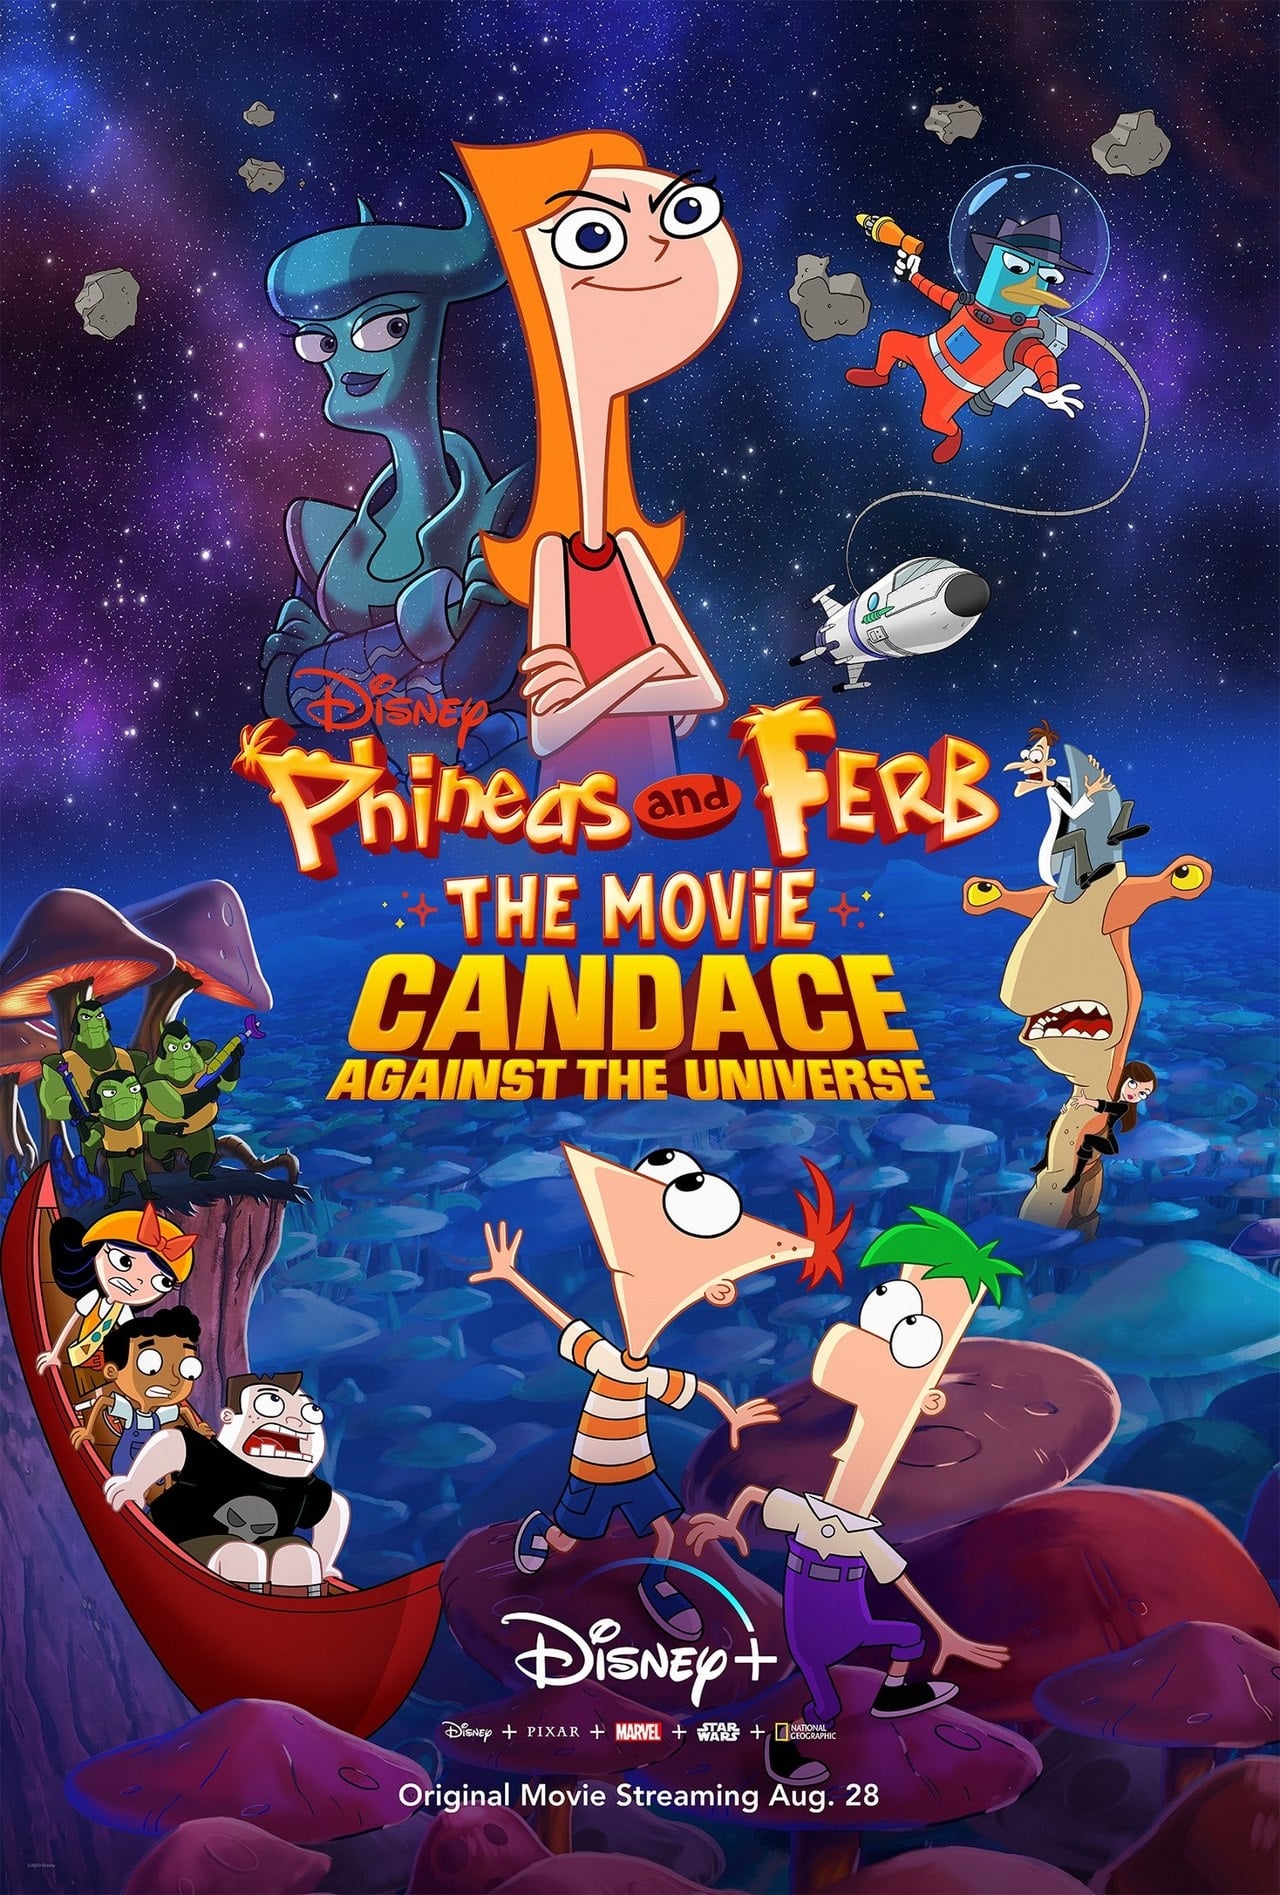 Phineas and Ferb the Movie: Candace Against the Universe (2020) 256Kbps 23.976Fps 48Khz 5.1Ch Disney+ DD+ E-AC3 Turkish Audio TAC